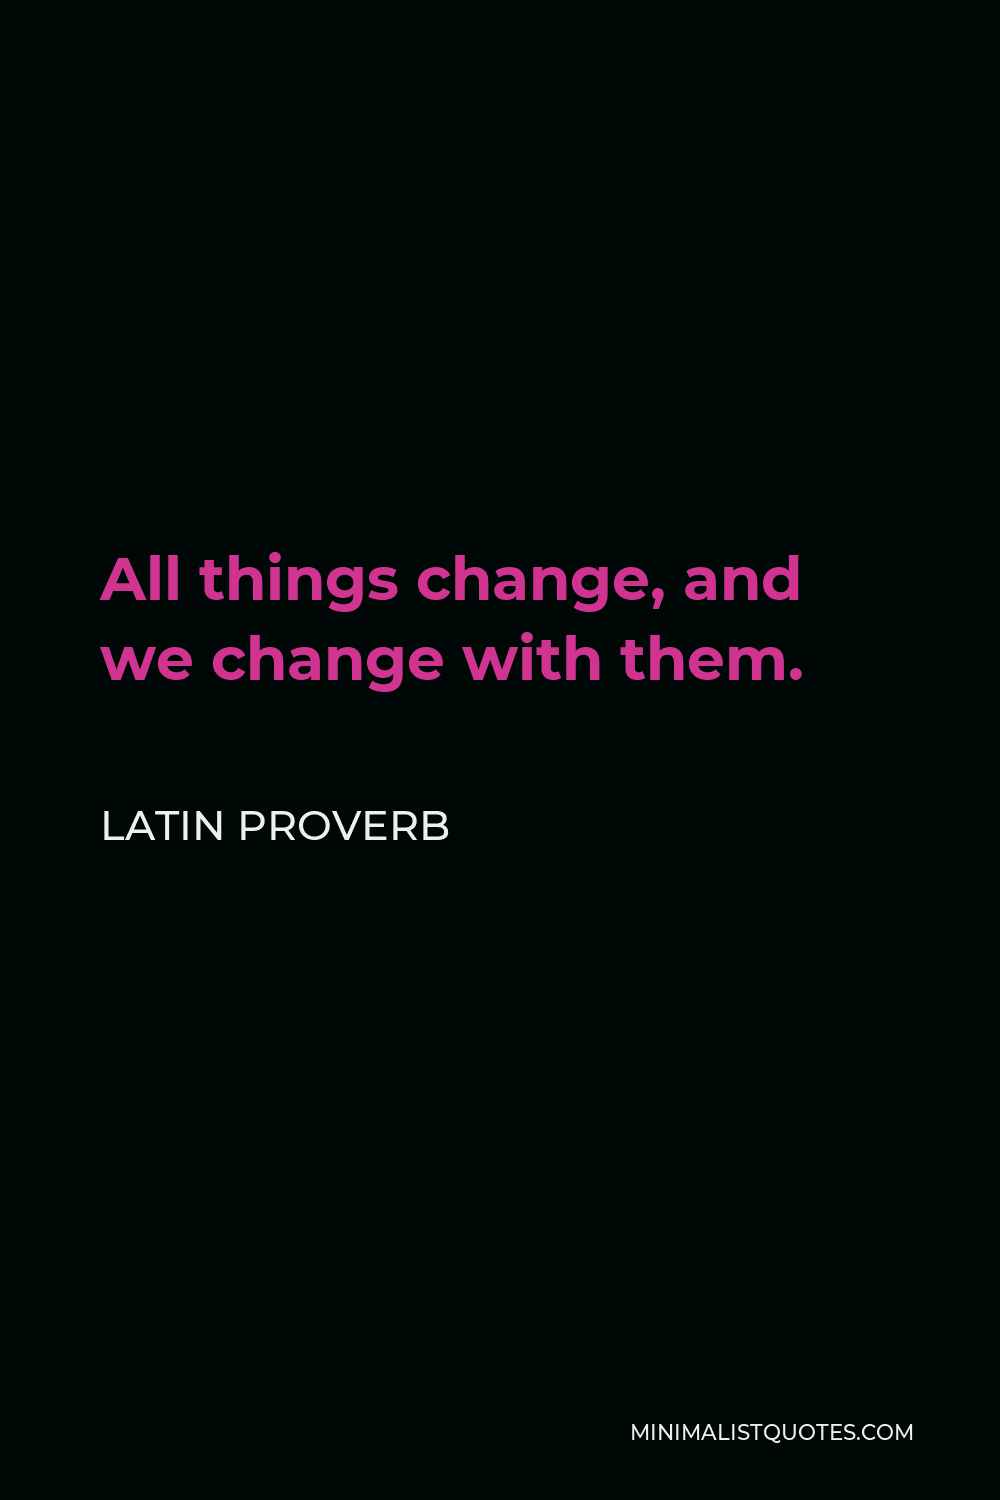 Latin Proverb Quote - All things change, and we change with them.